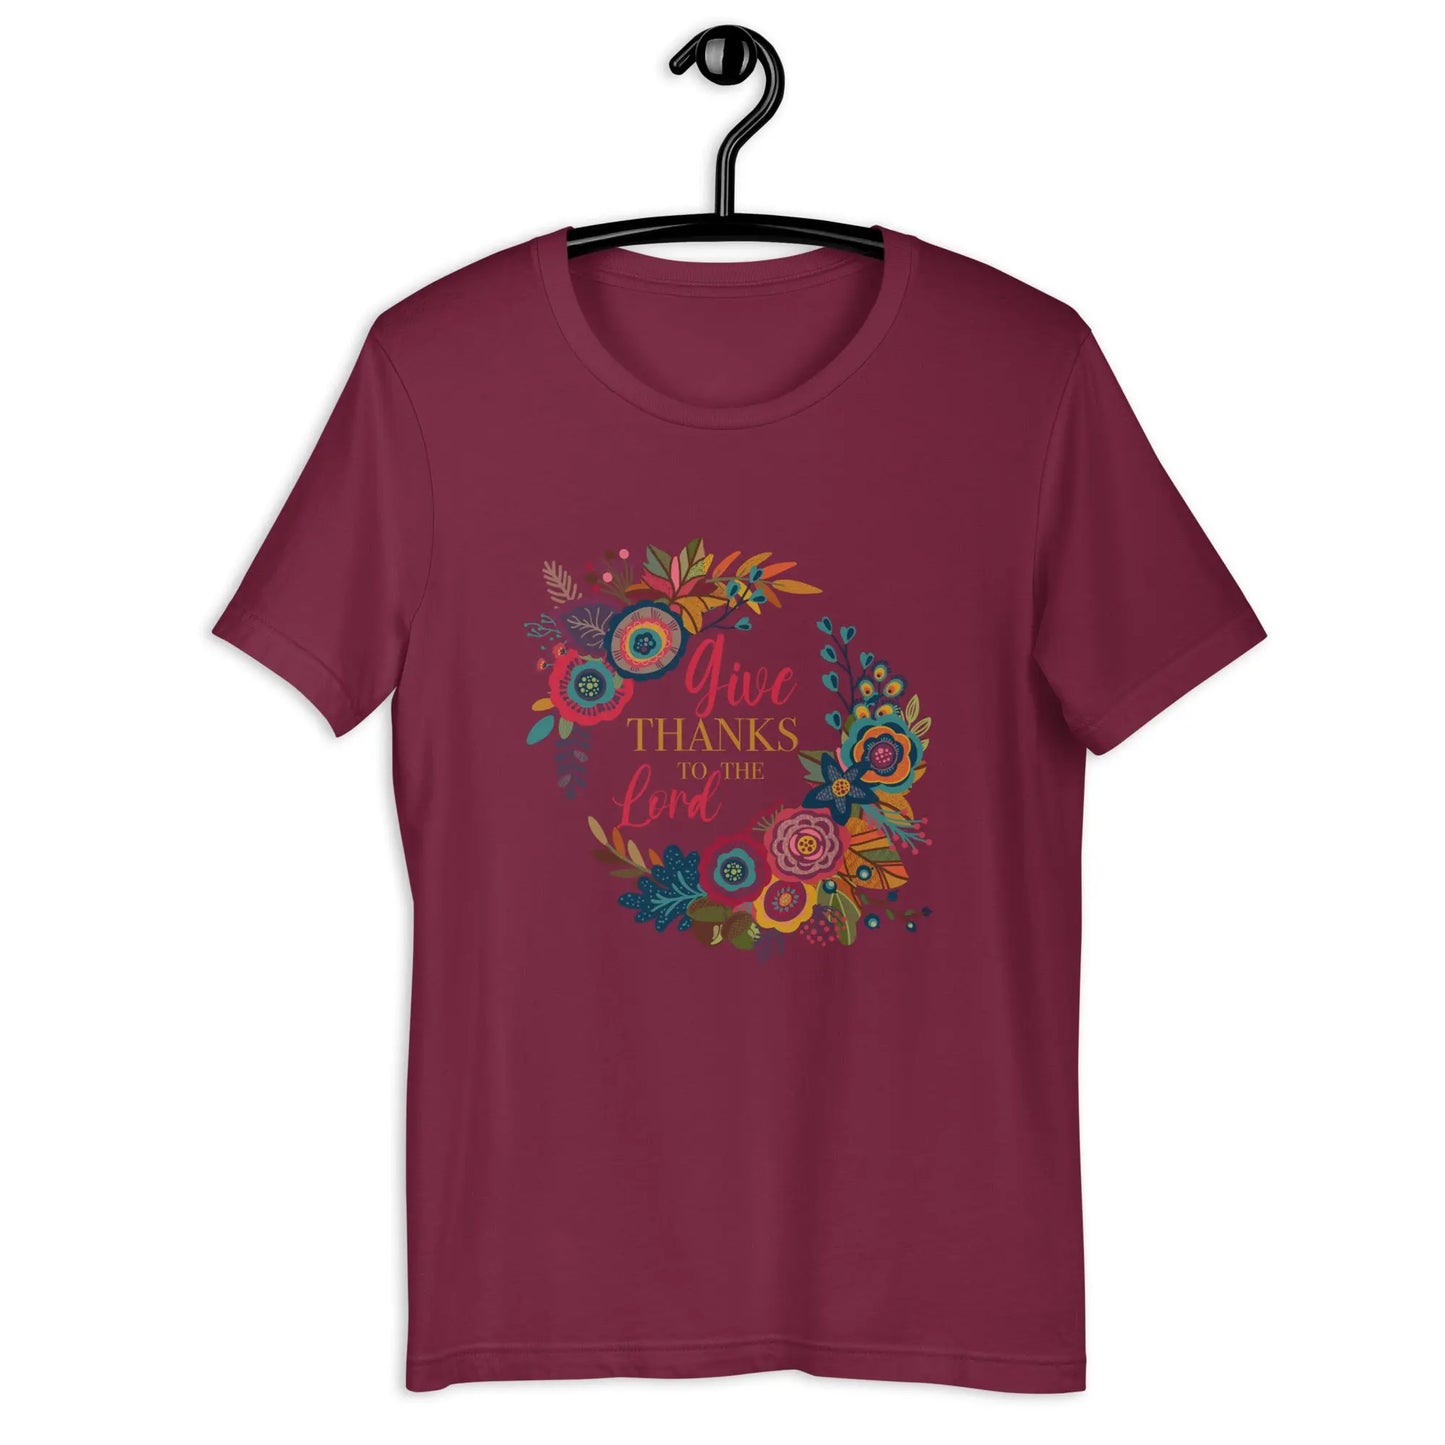 Give Thanks to the Lord T-shirt, Thanksgiving Tee Amazing Faith Designs